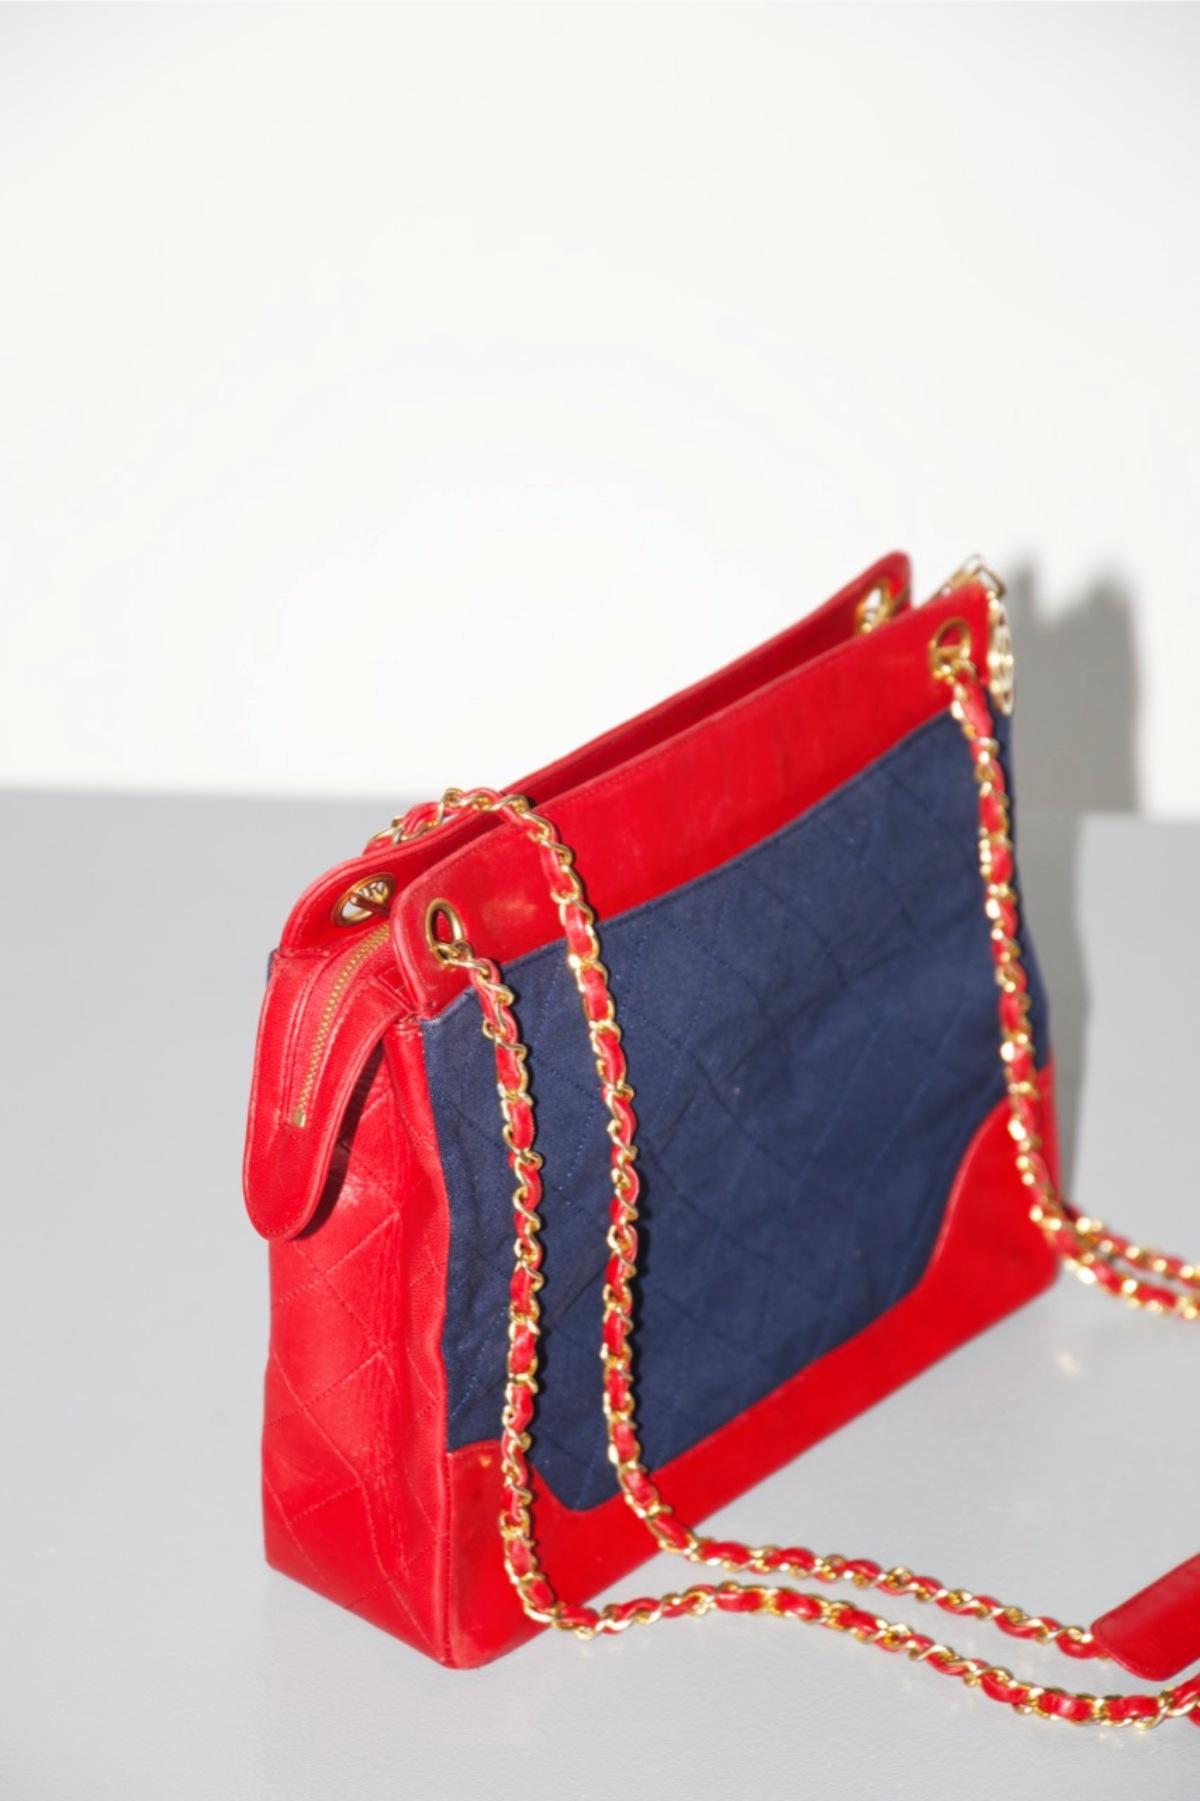 Women's Rare Chanel Shoulder Bag in Red Leather and Denim Fabric For Sale